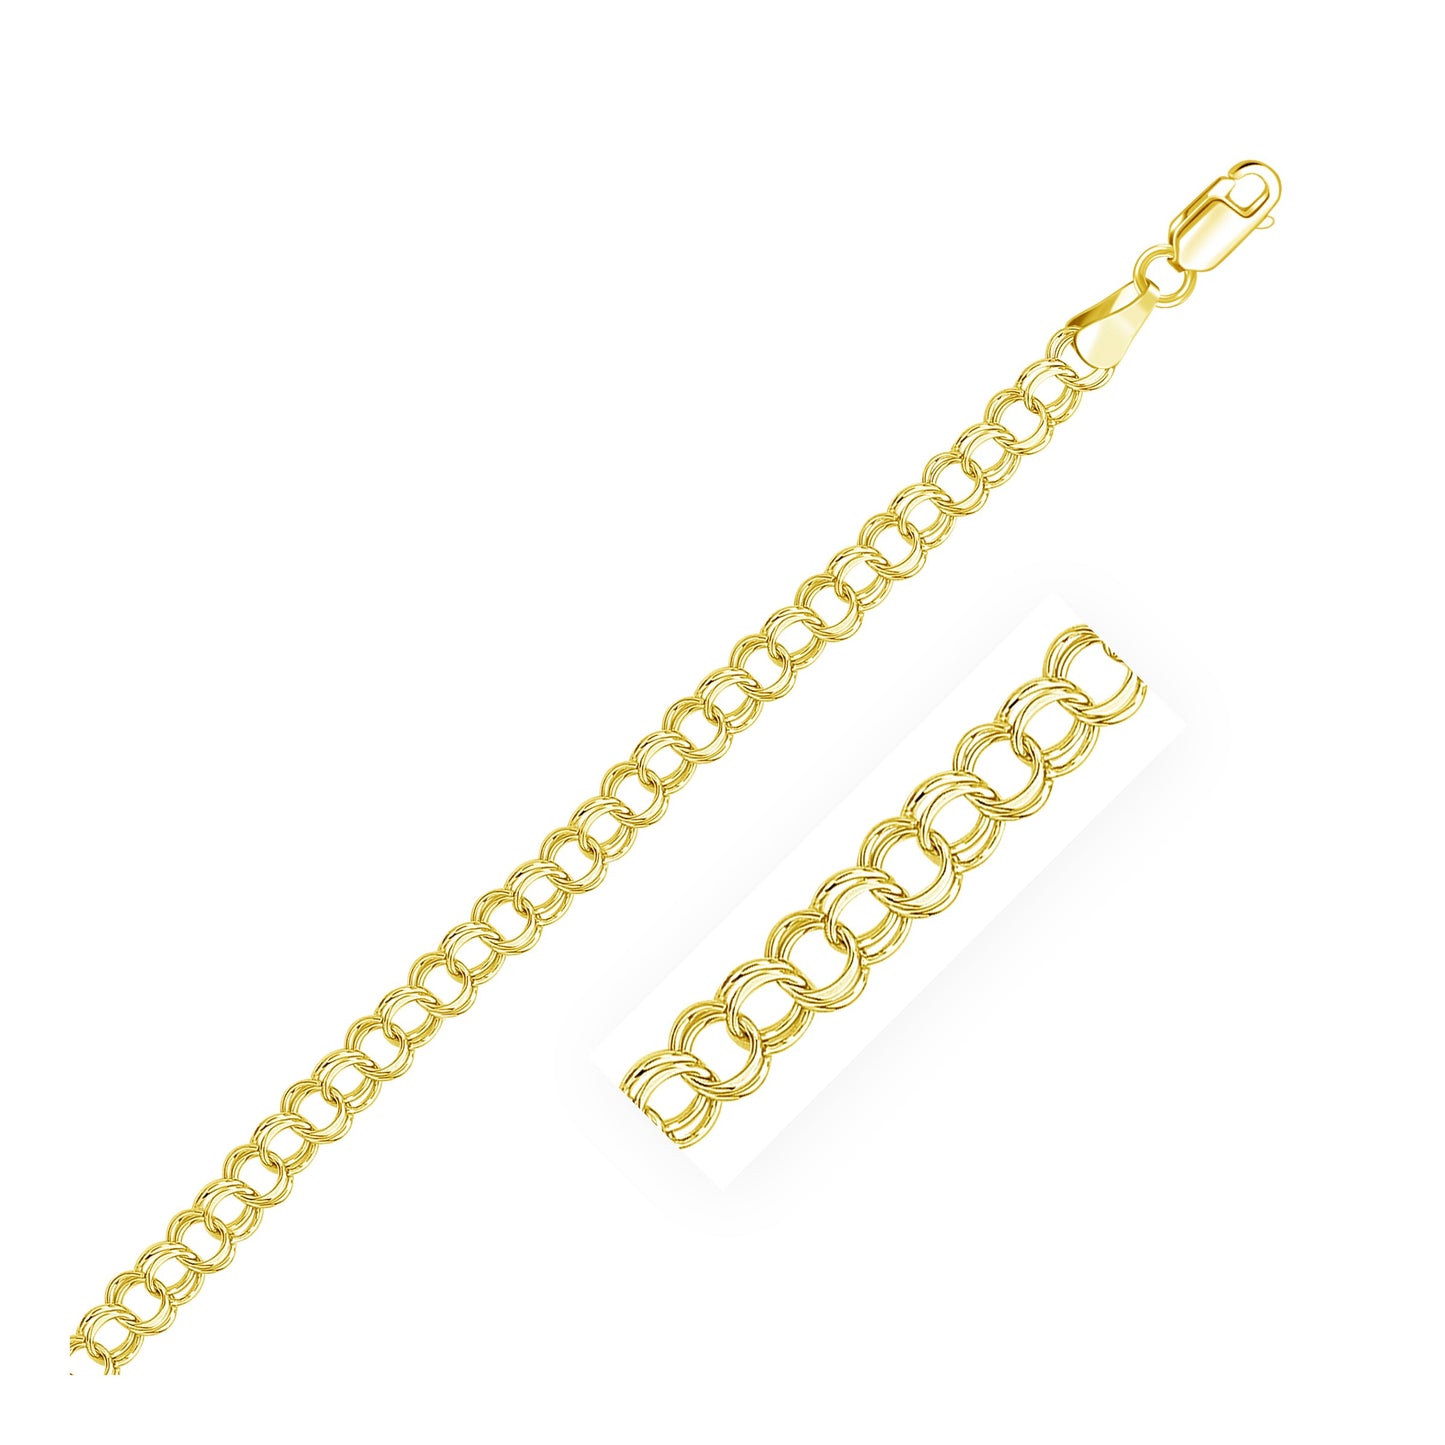 5.0 mm 14k Yellow Gold Solid Double Link Charm Bracelet